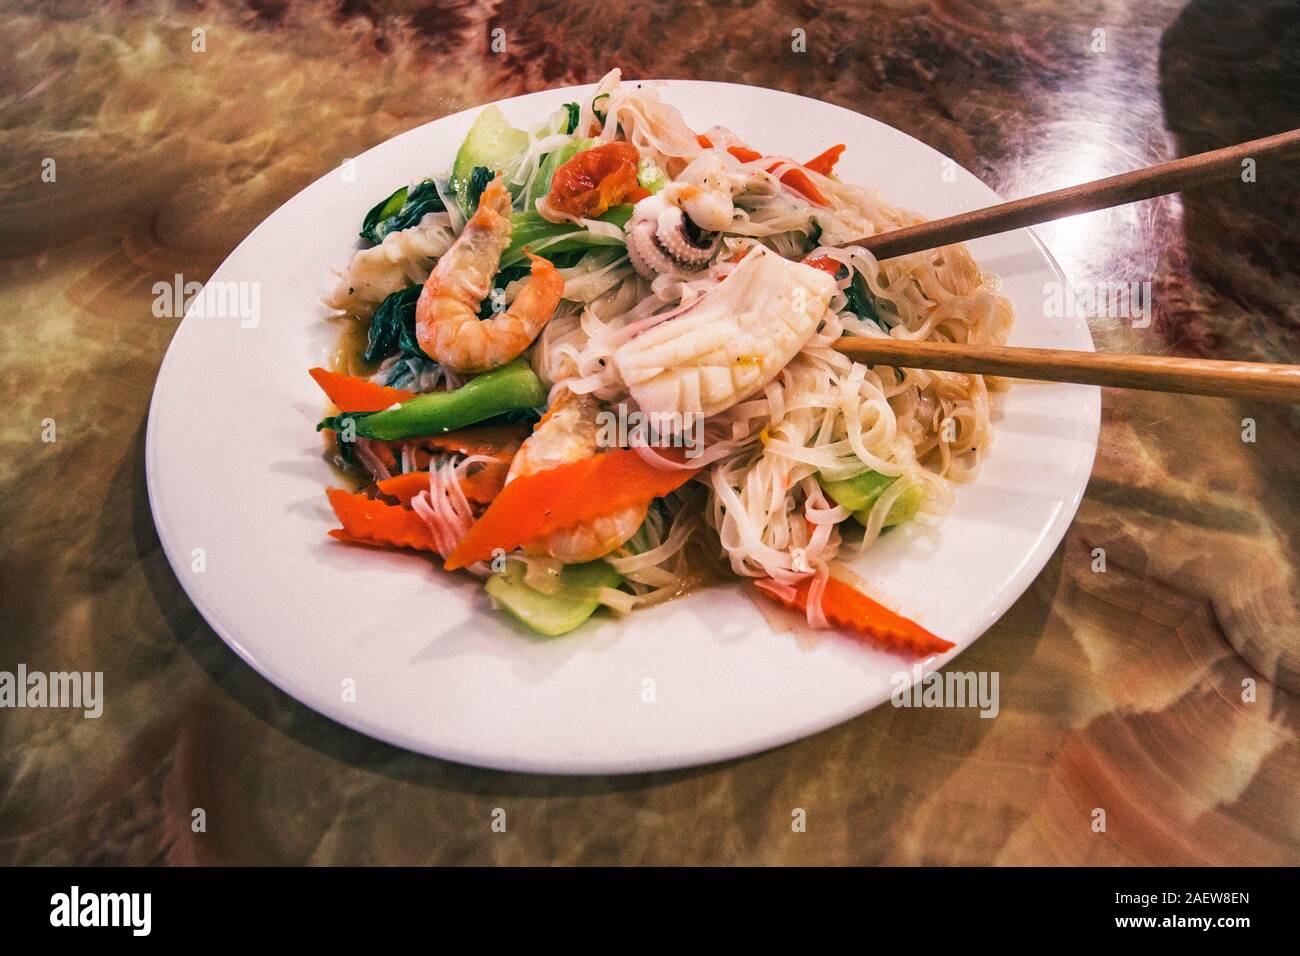 Seafood pad Thai dish of Thai fried rice noodles on a white plate with chopsticks and grated carrot garnish. Stock Photo